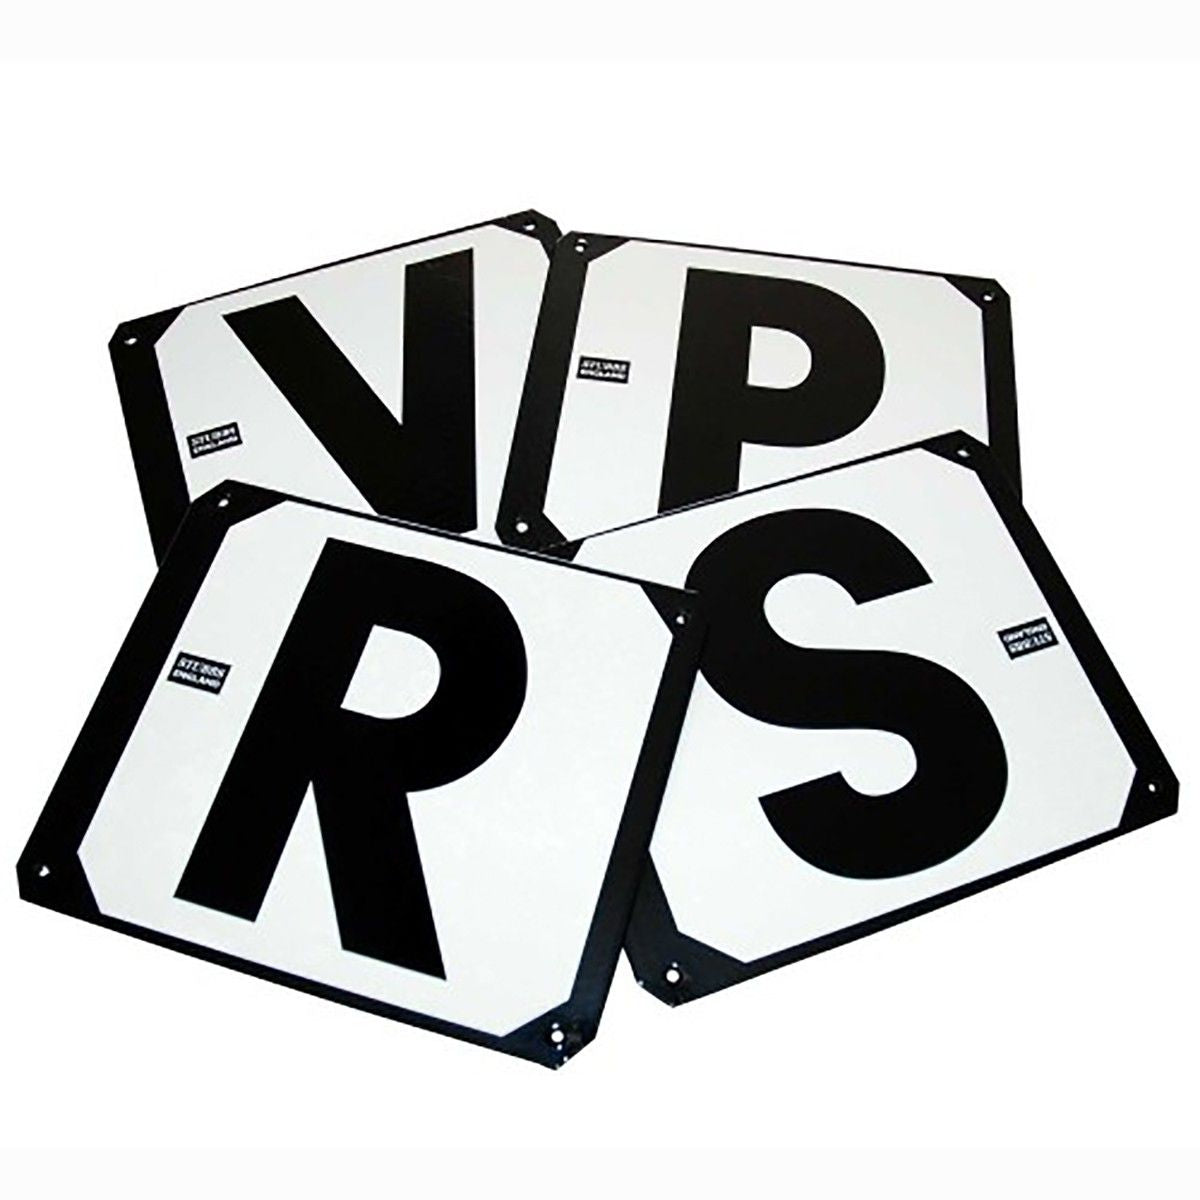 Letters on plates( RSVP)